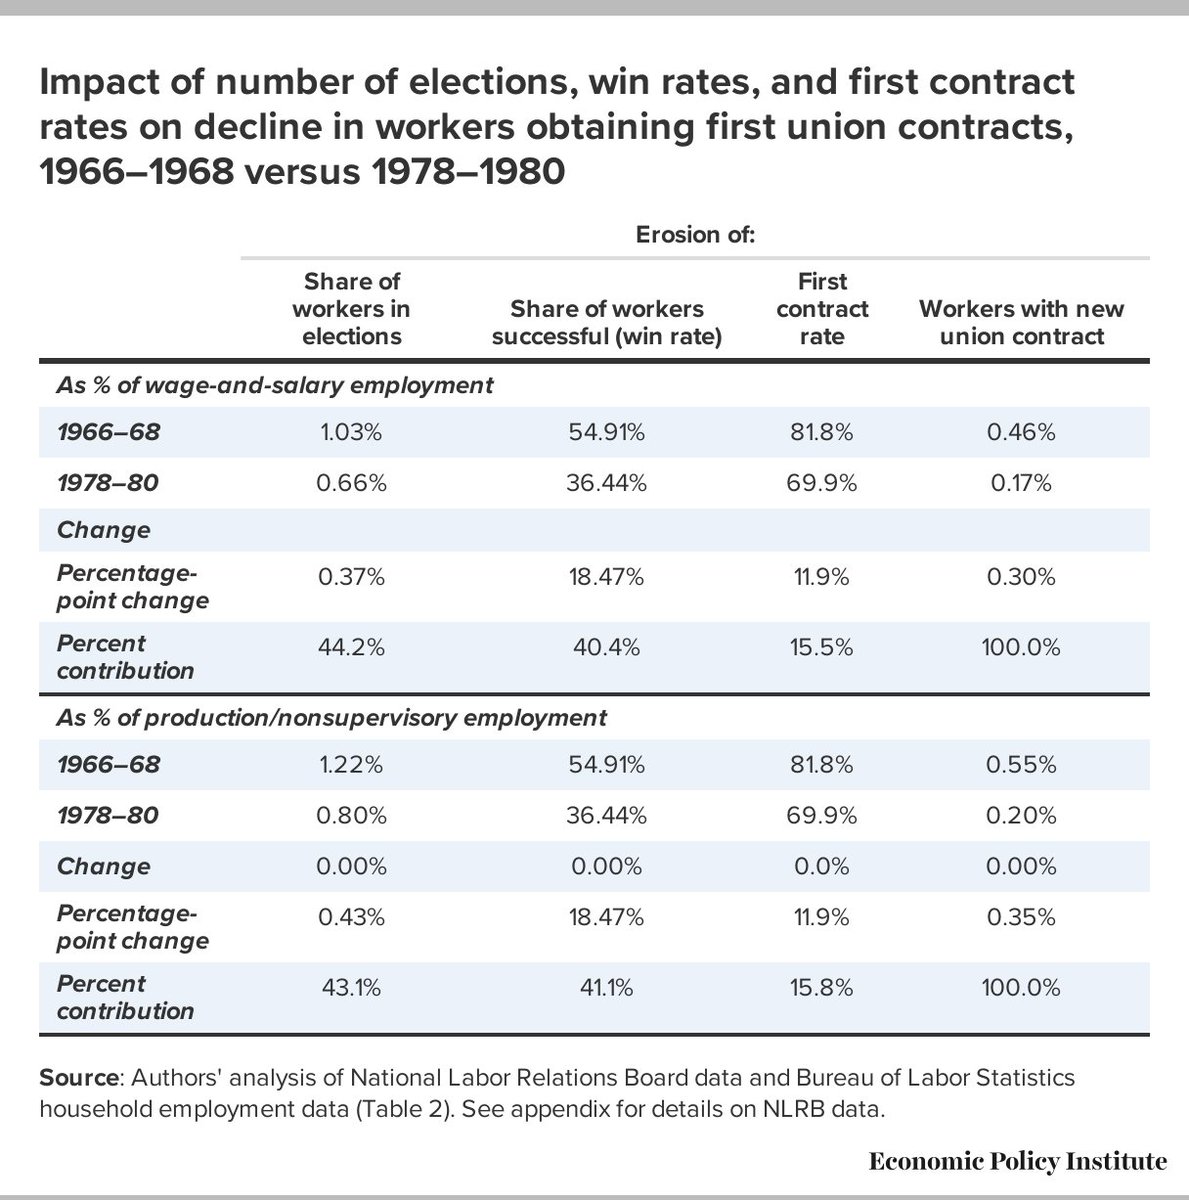 (7/14) In 50s & 60s more than 1% of employed were in NLRB election each year. In 70s that fell to 0.78%, in 80s to 0.29%. While 0.46% of the workforce able to become union in the 1966–1968 period, only 0.17% of workforceable to do so by 1978–1980.